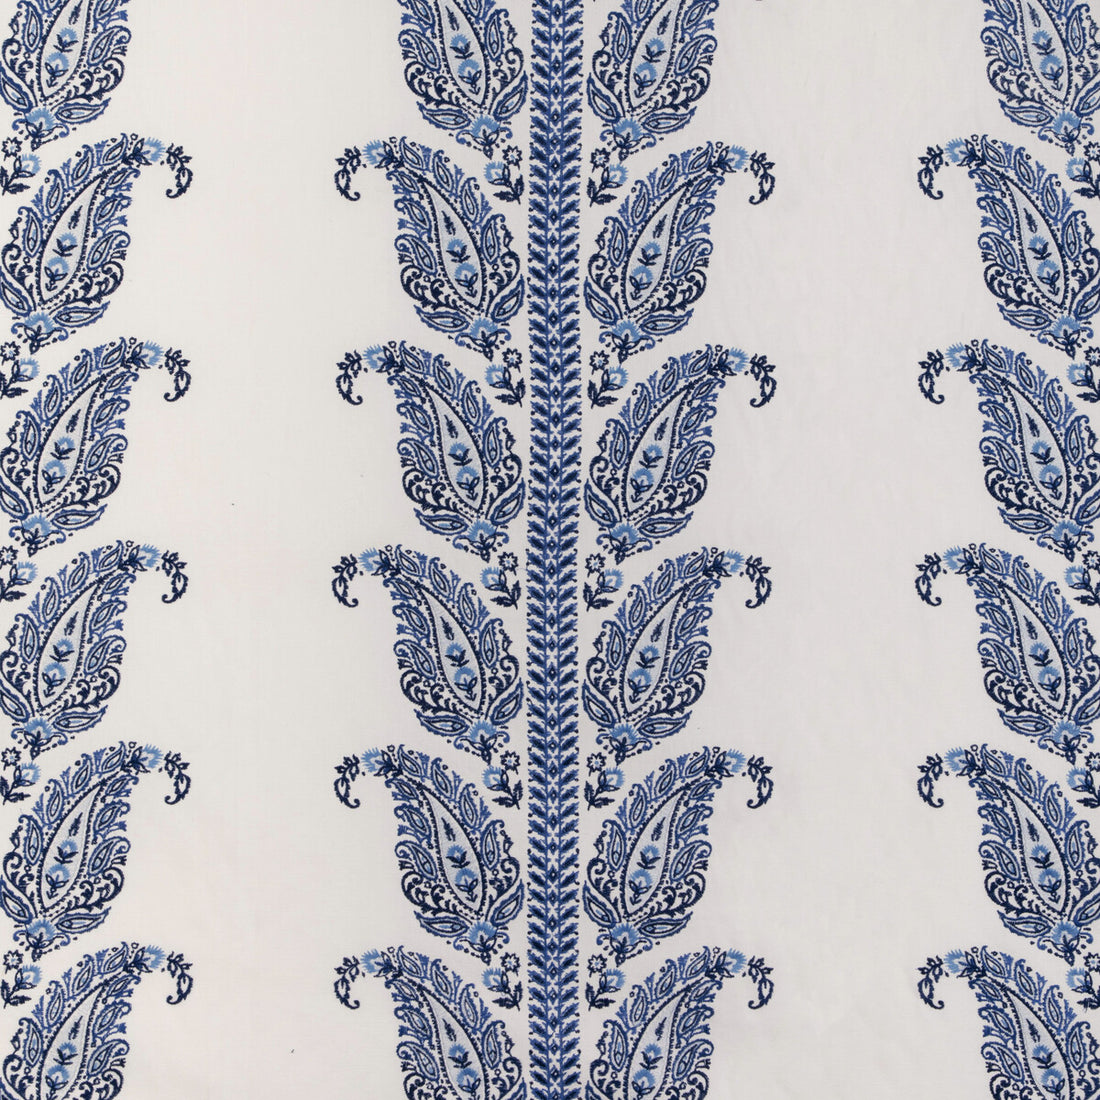 Yara Paisley Emb fabric in blue color - pattern 8023112.55.0 - by Brunschwig &amp; Fils in the Anduze Embroideries collection